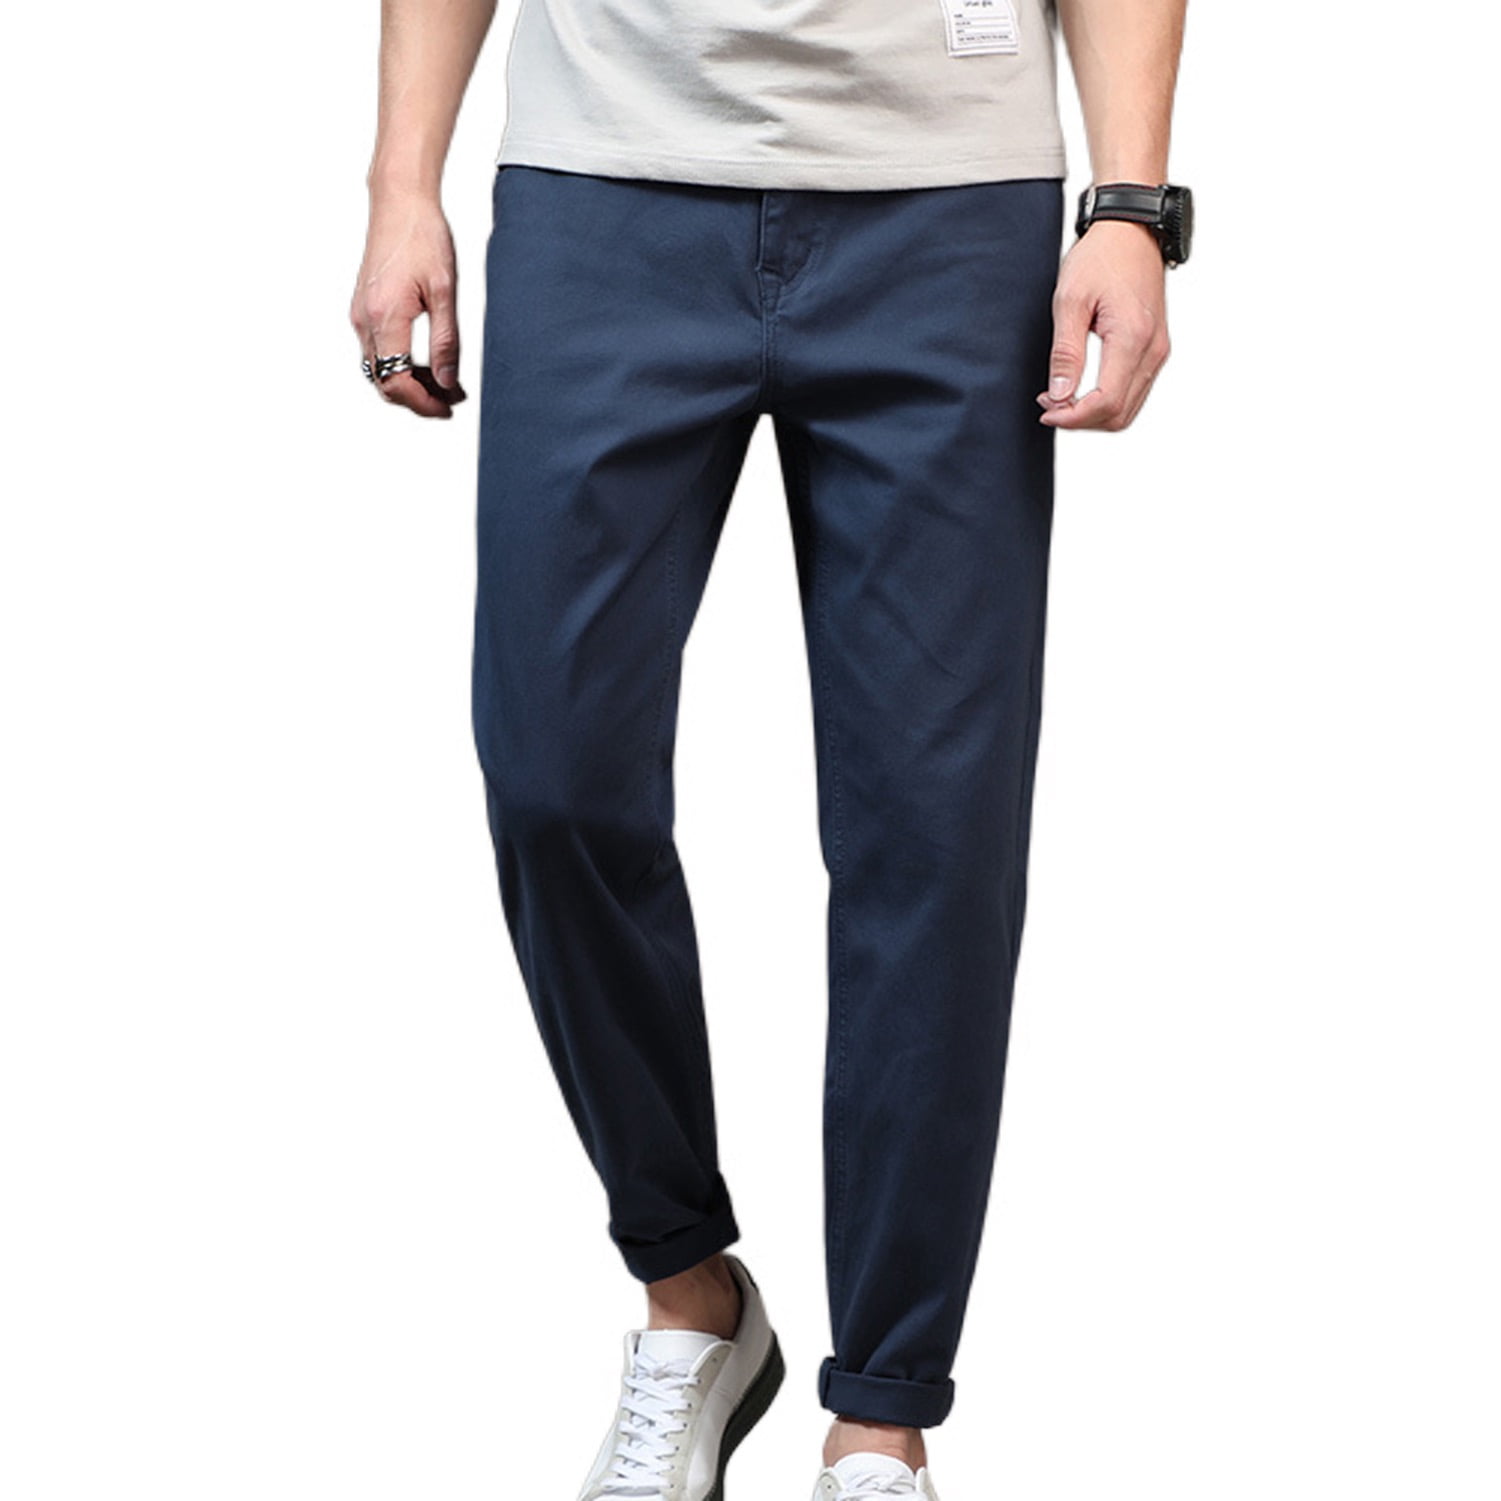 Pantalón Azul Eléctrico Hombre, Casual Slim Fit, Chain Tapered – PN703